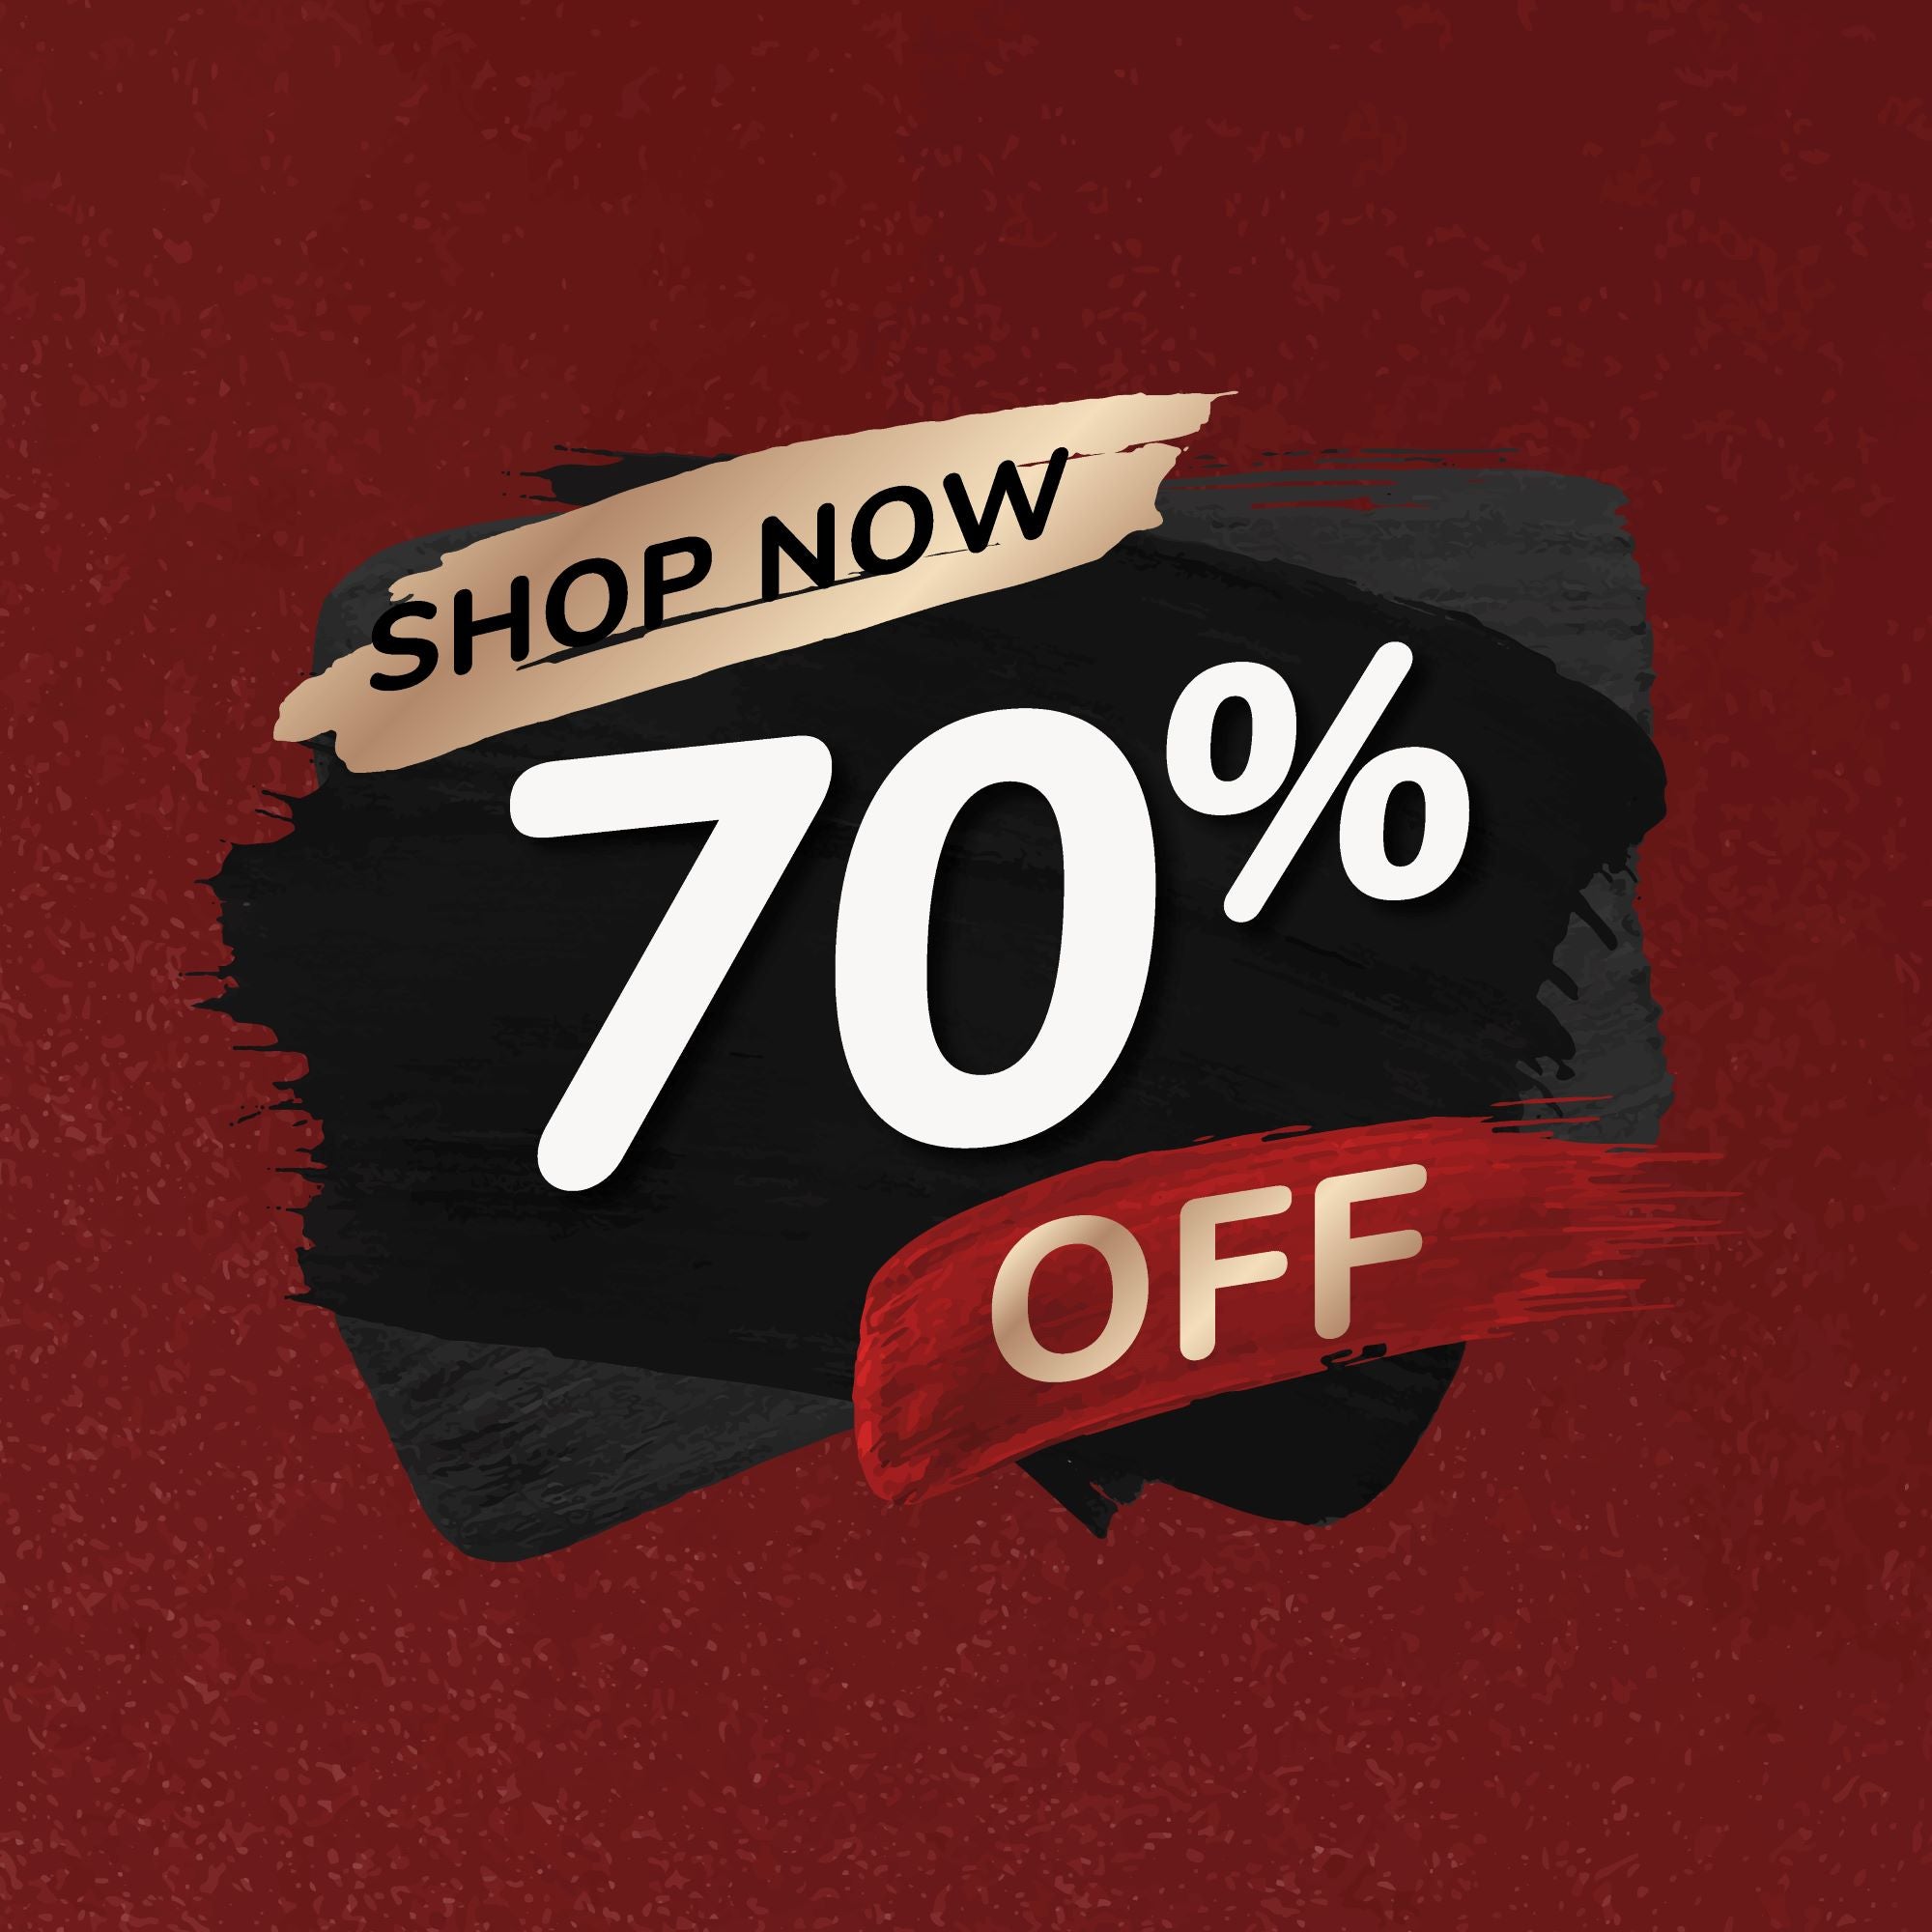 Fancy Dress Sale - Cheap Costumes & Outfits - Up to 70% Off